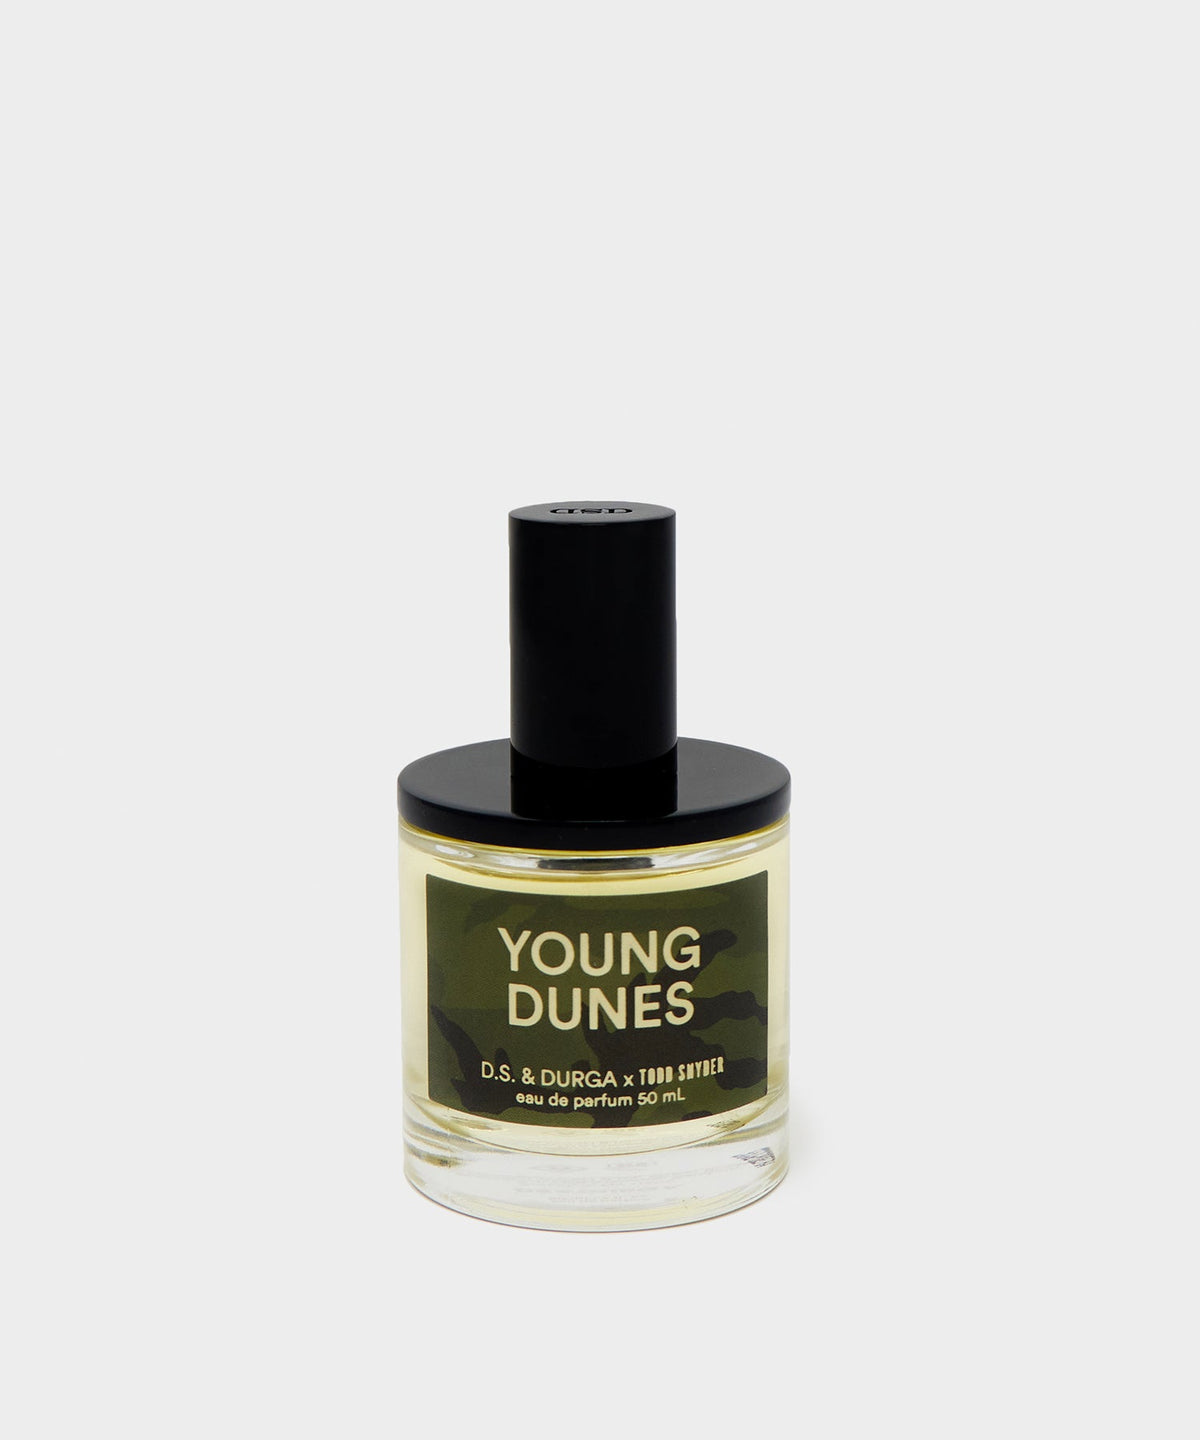 Todd Snyder x D.S. & Durga Young Dunes 50 mL